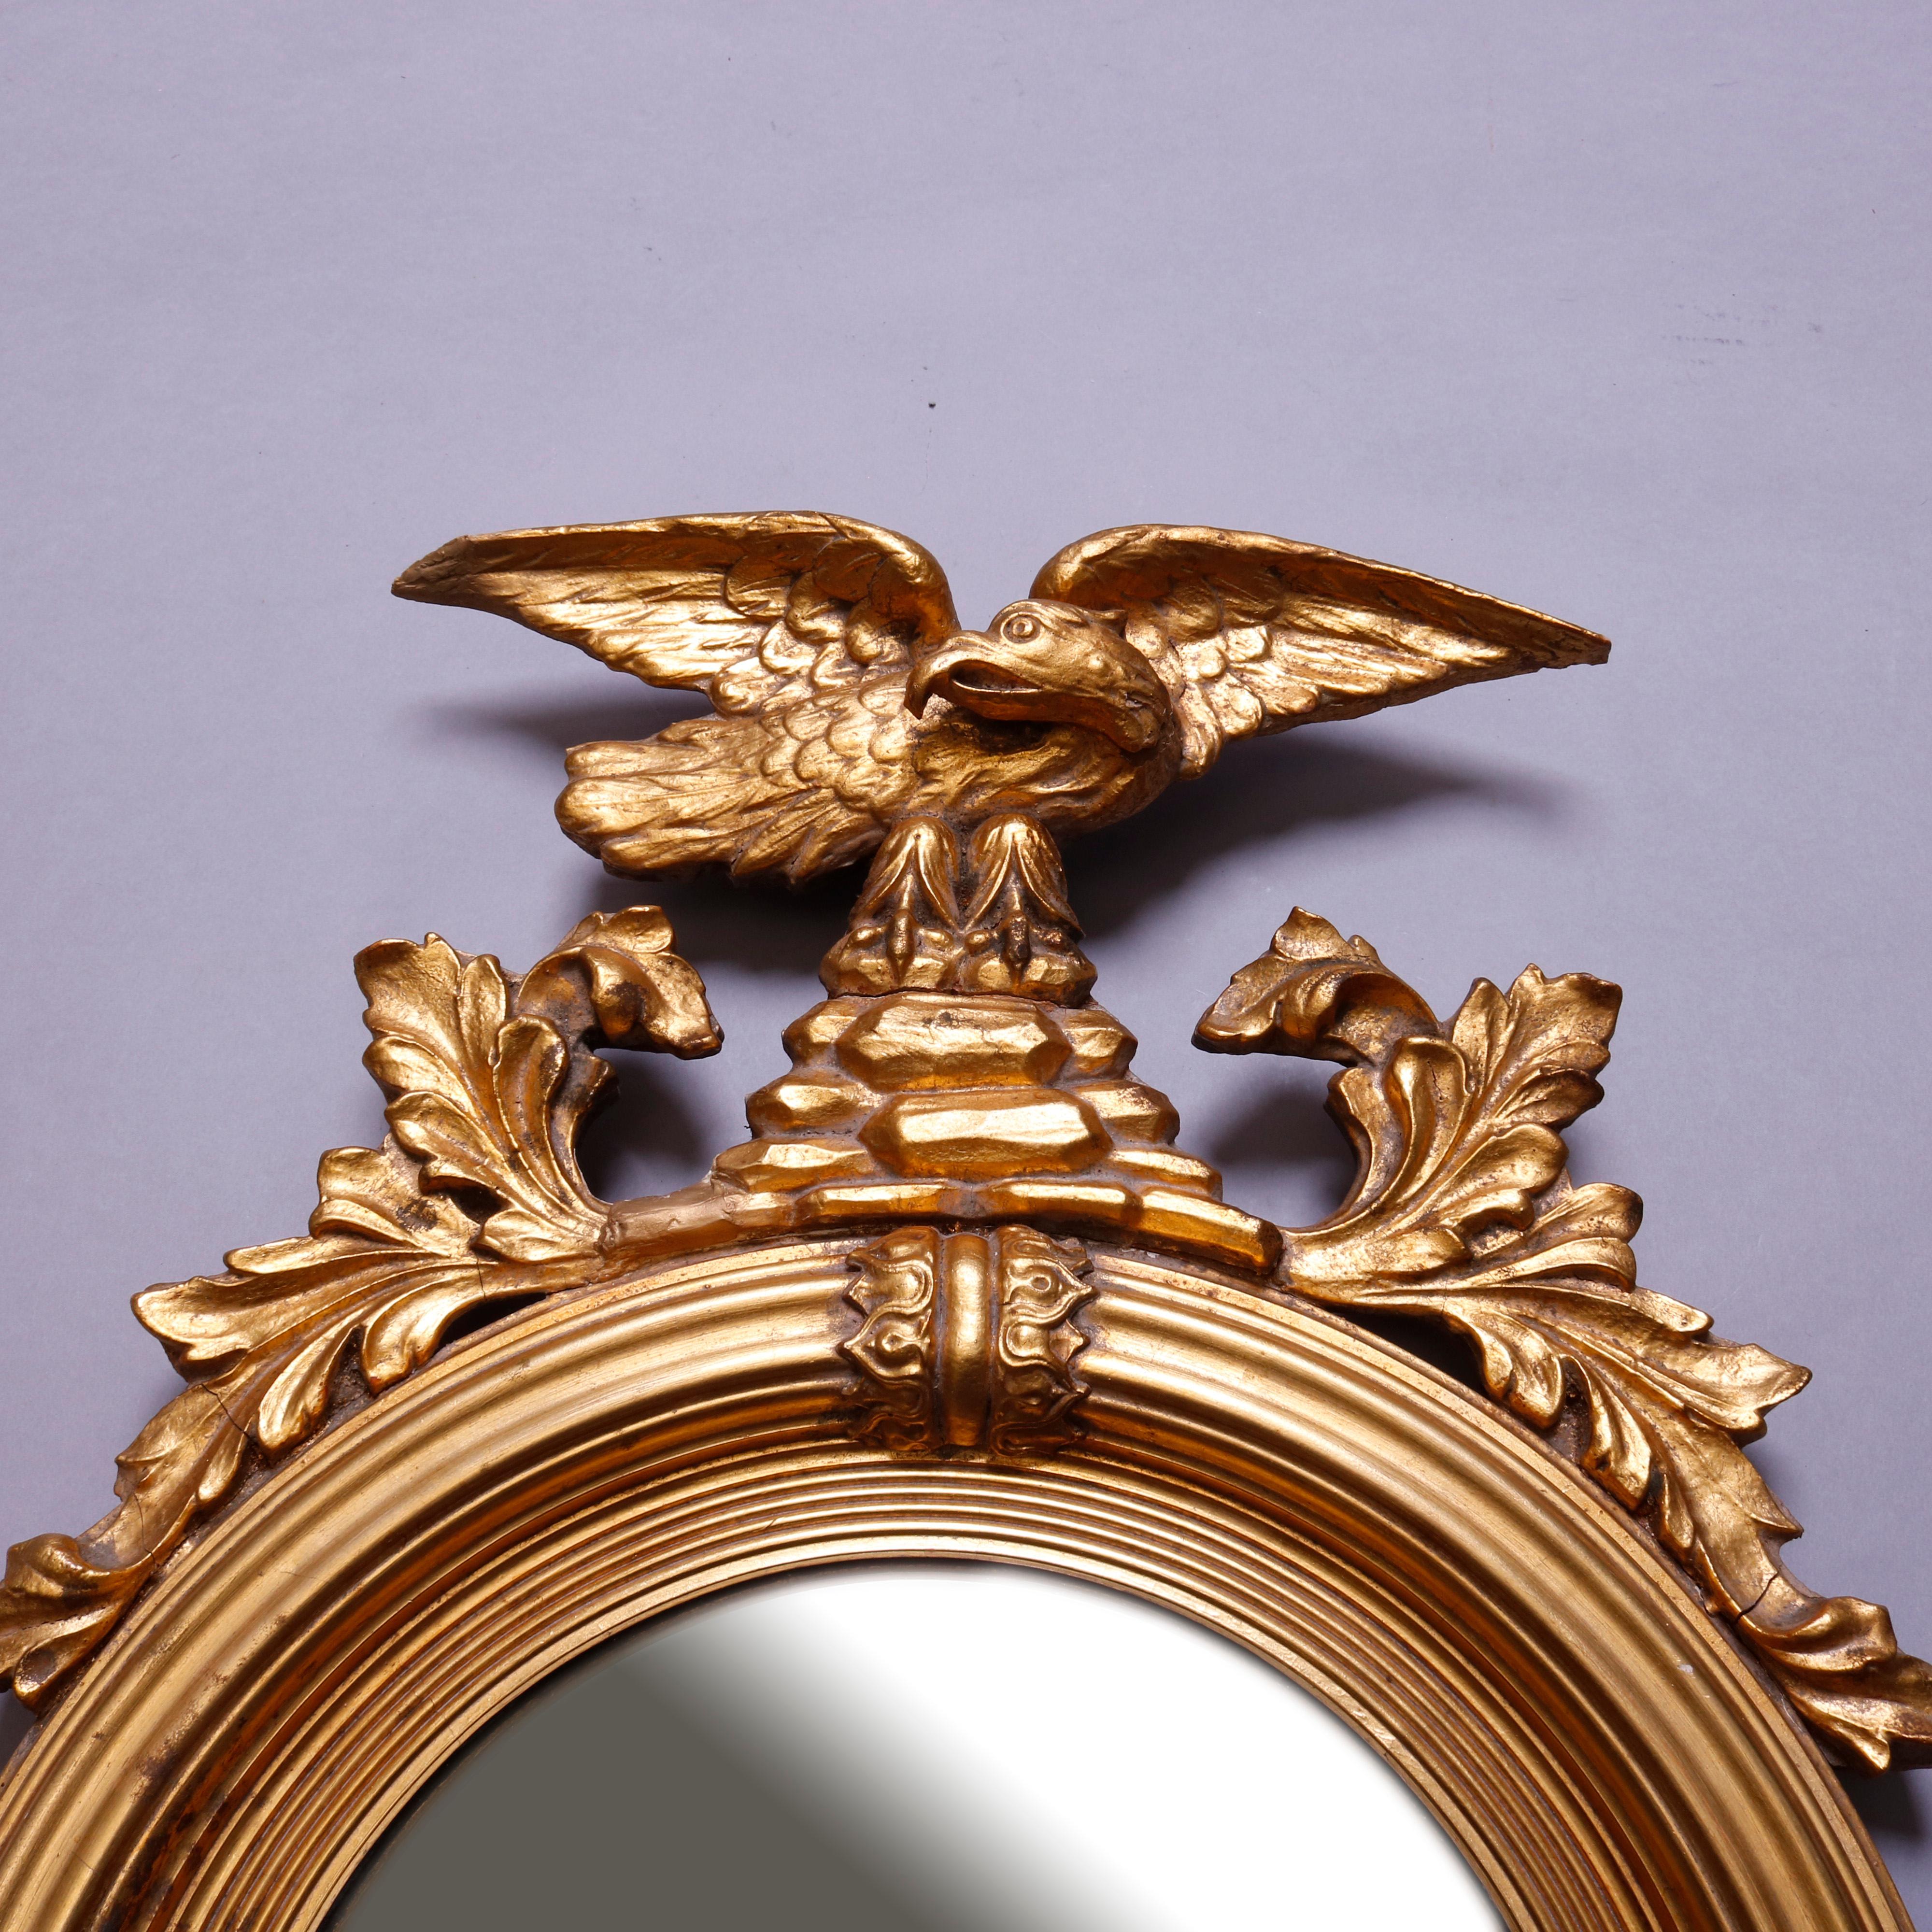 An antique figural Federal style figural giltwood wall mirror features crest with eagle flanked by acanthus surmounting round convex bullseye mirror with reeded frame having foliate decoration, 20th century

***DELIVERY NOTICE – Due to COVID-19 we